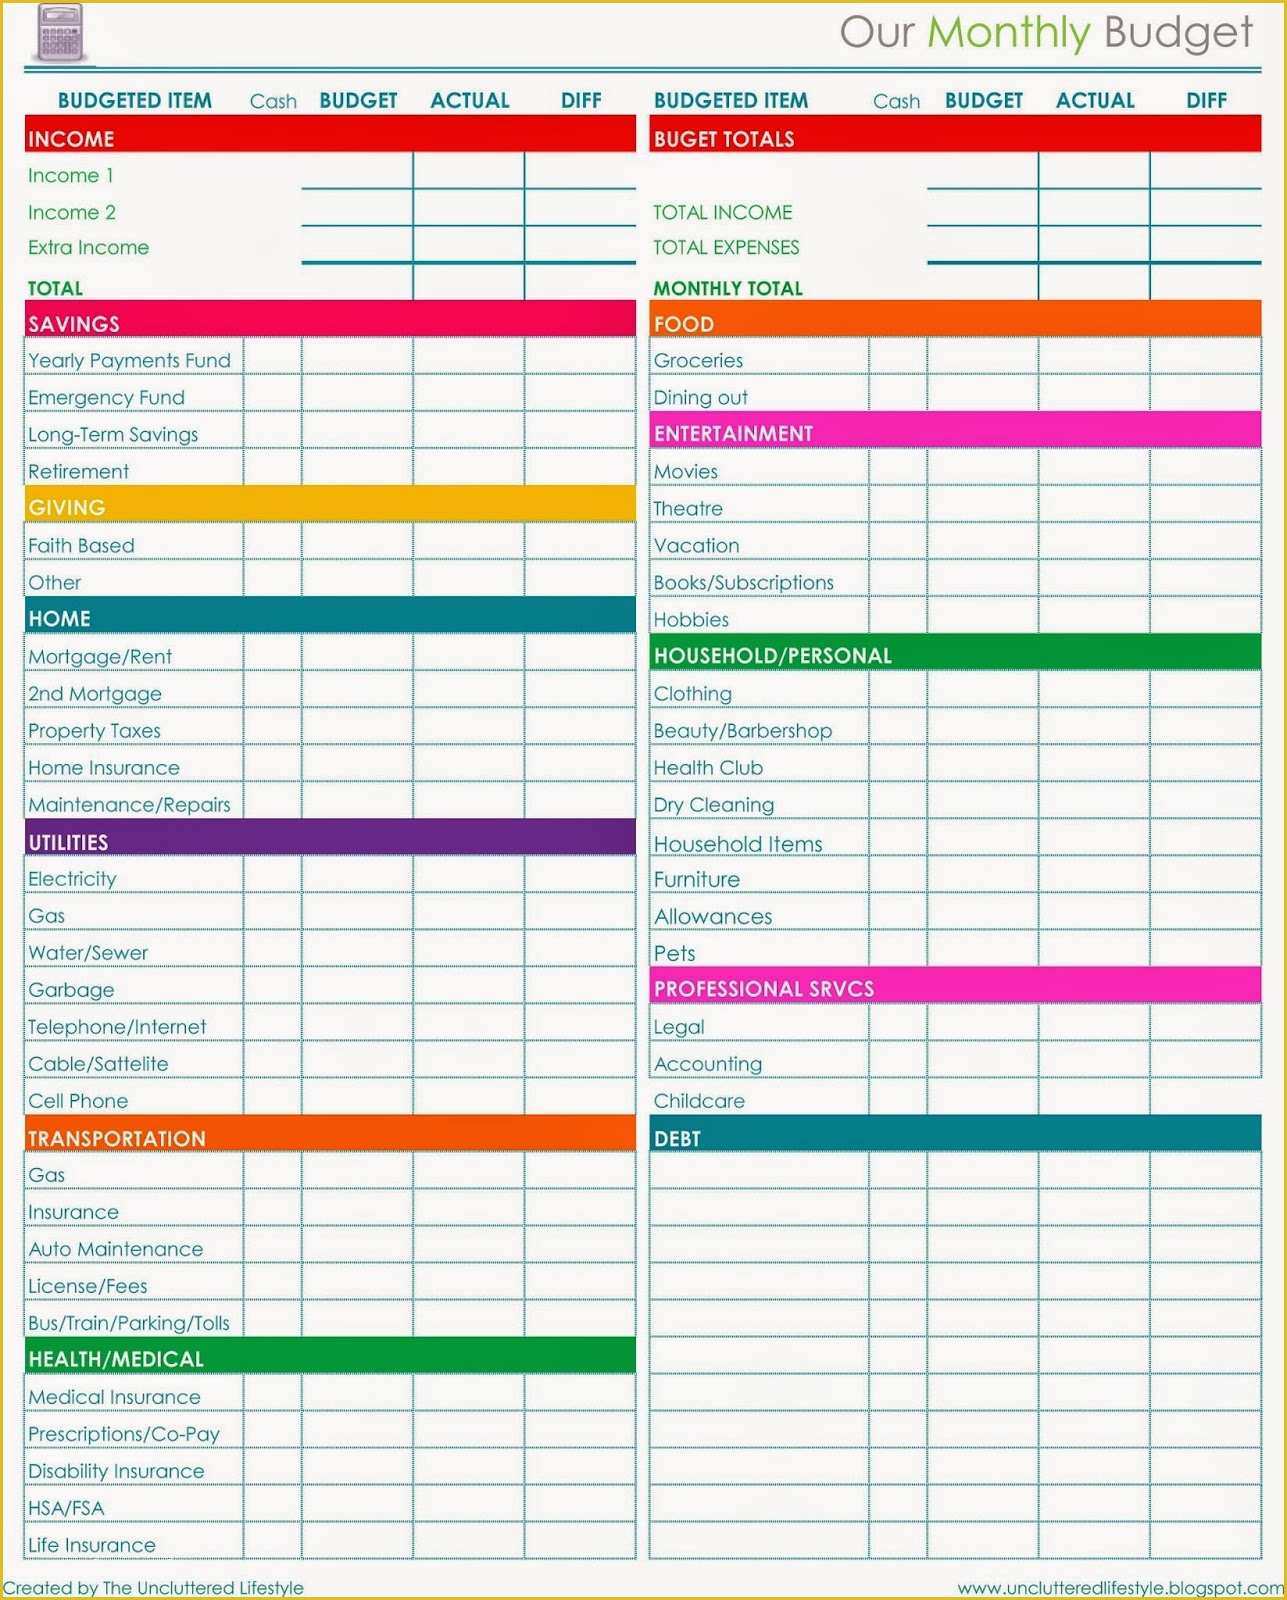 Personal Planner Template Free Of 2015 Planner More Free Printables Find Lifestyle